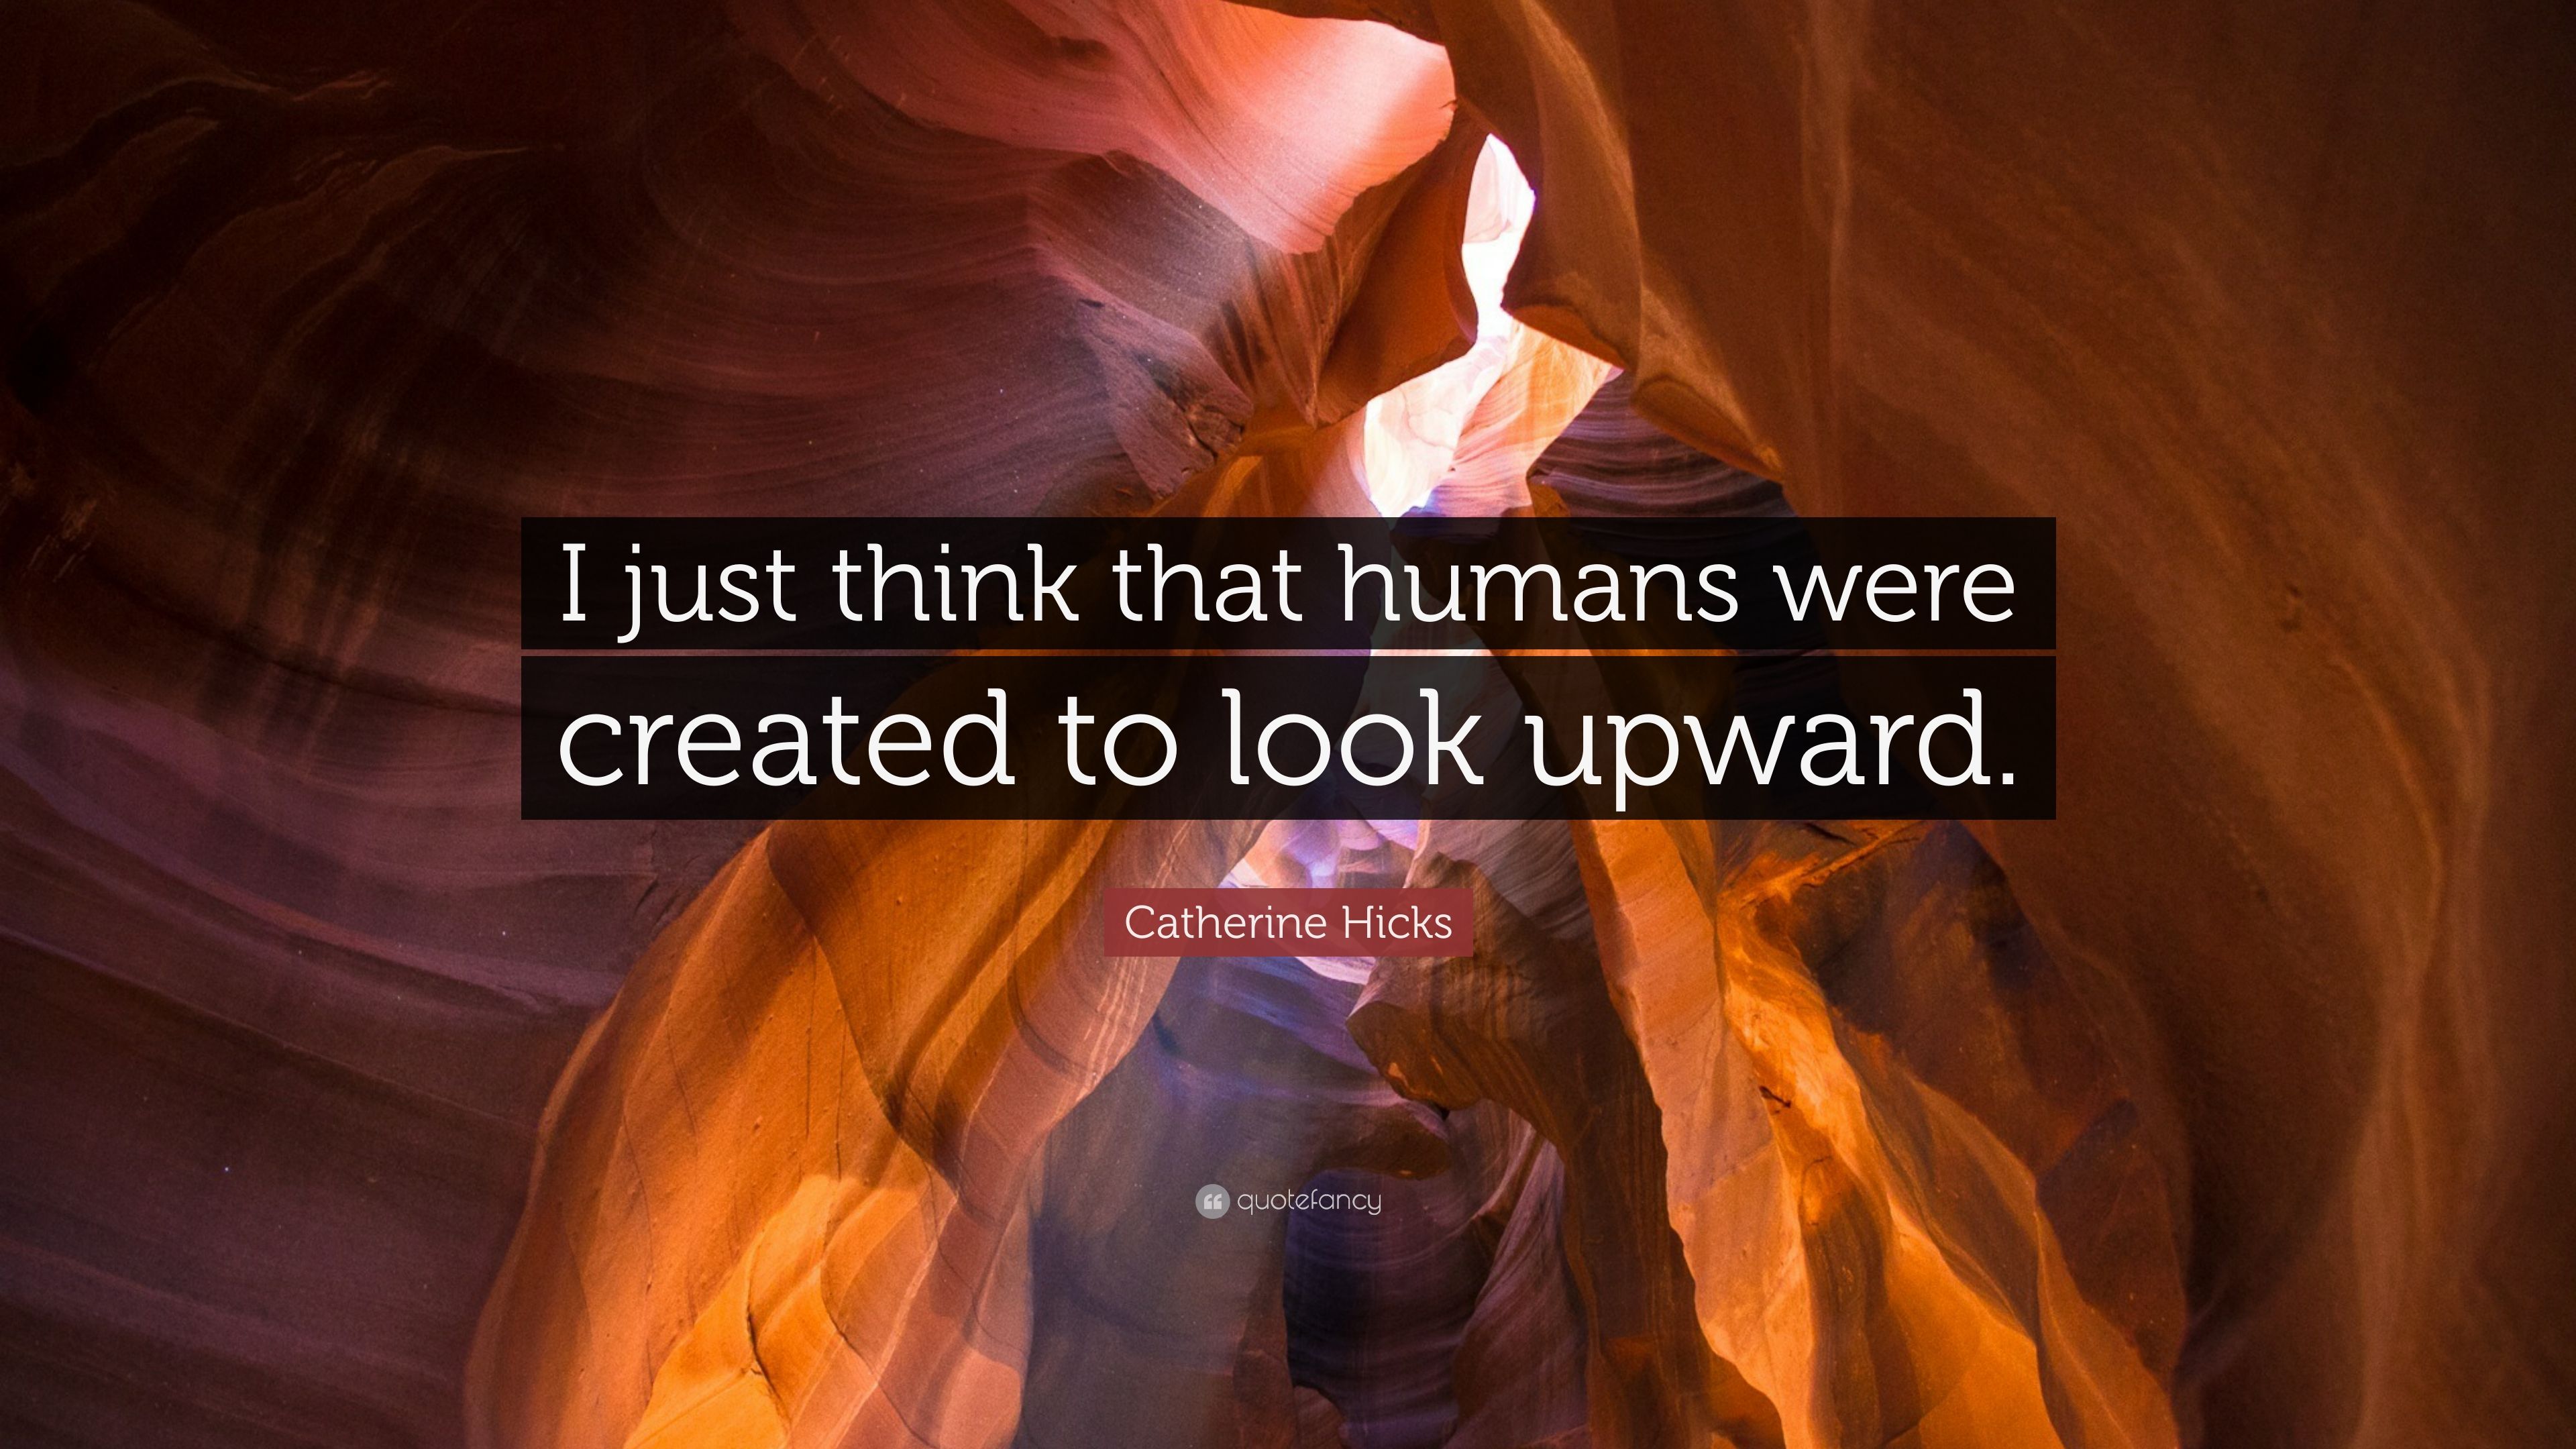 Catherine Hicks Quote: “I just think that humans were created to